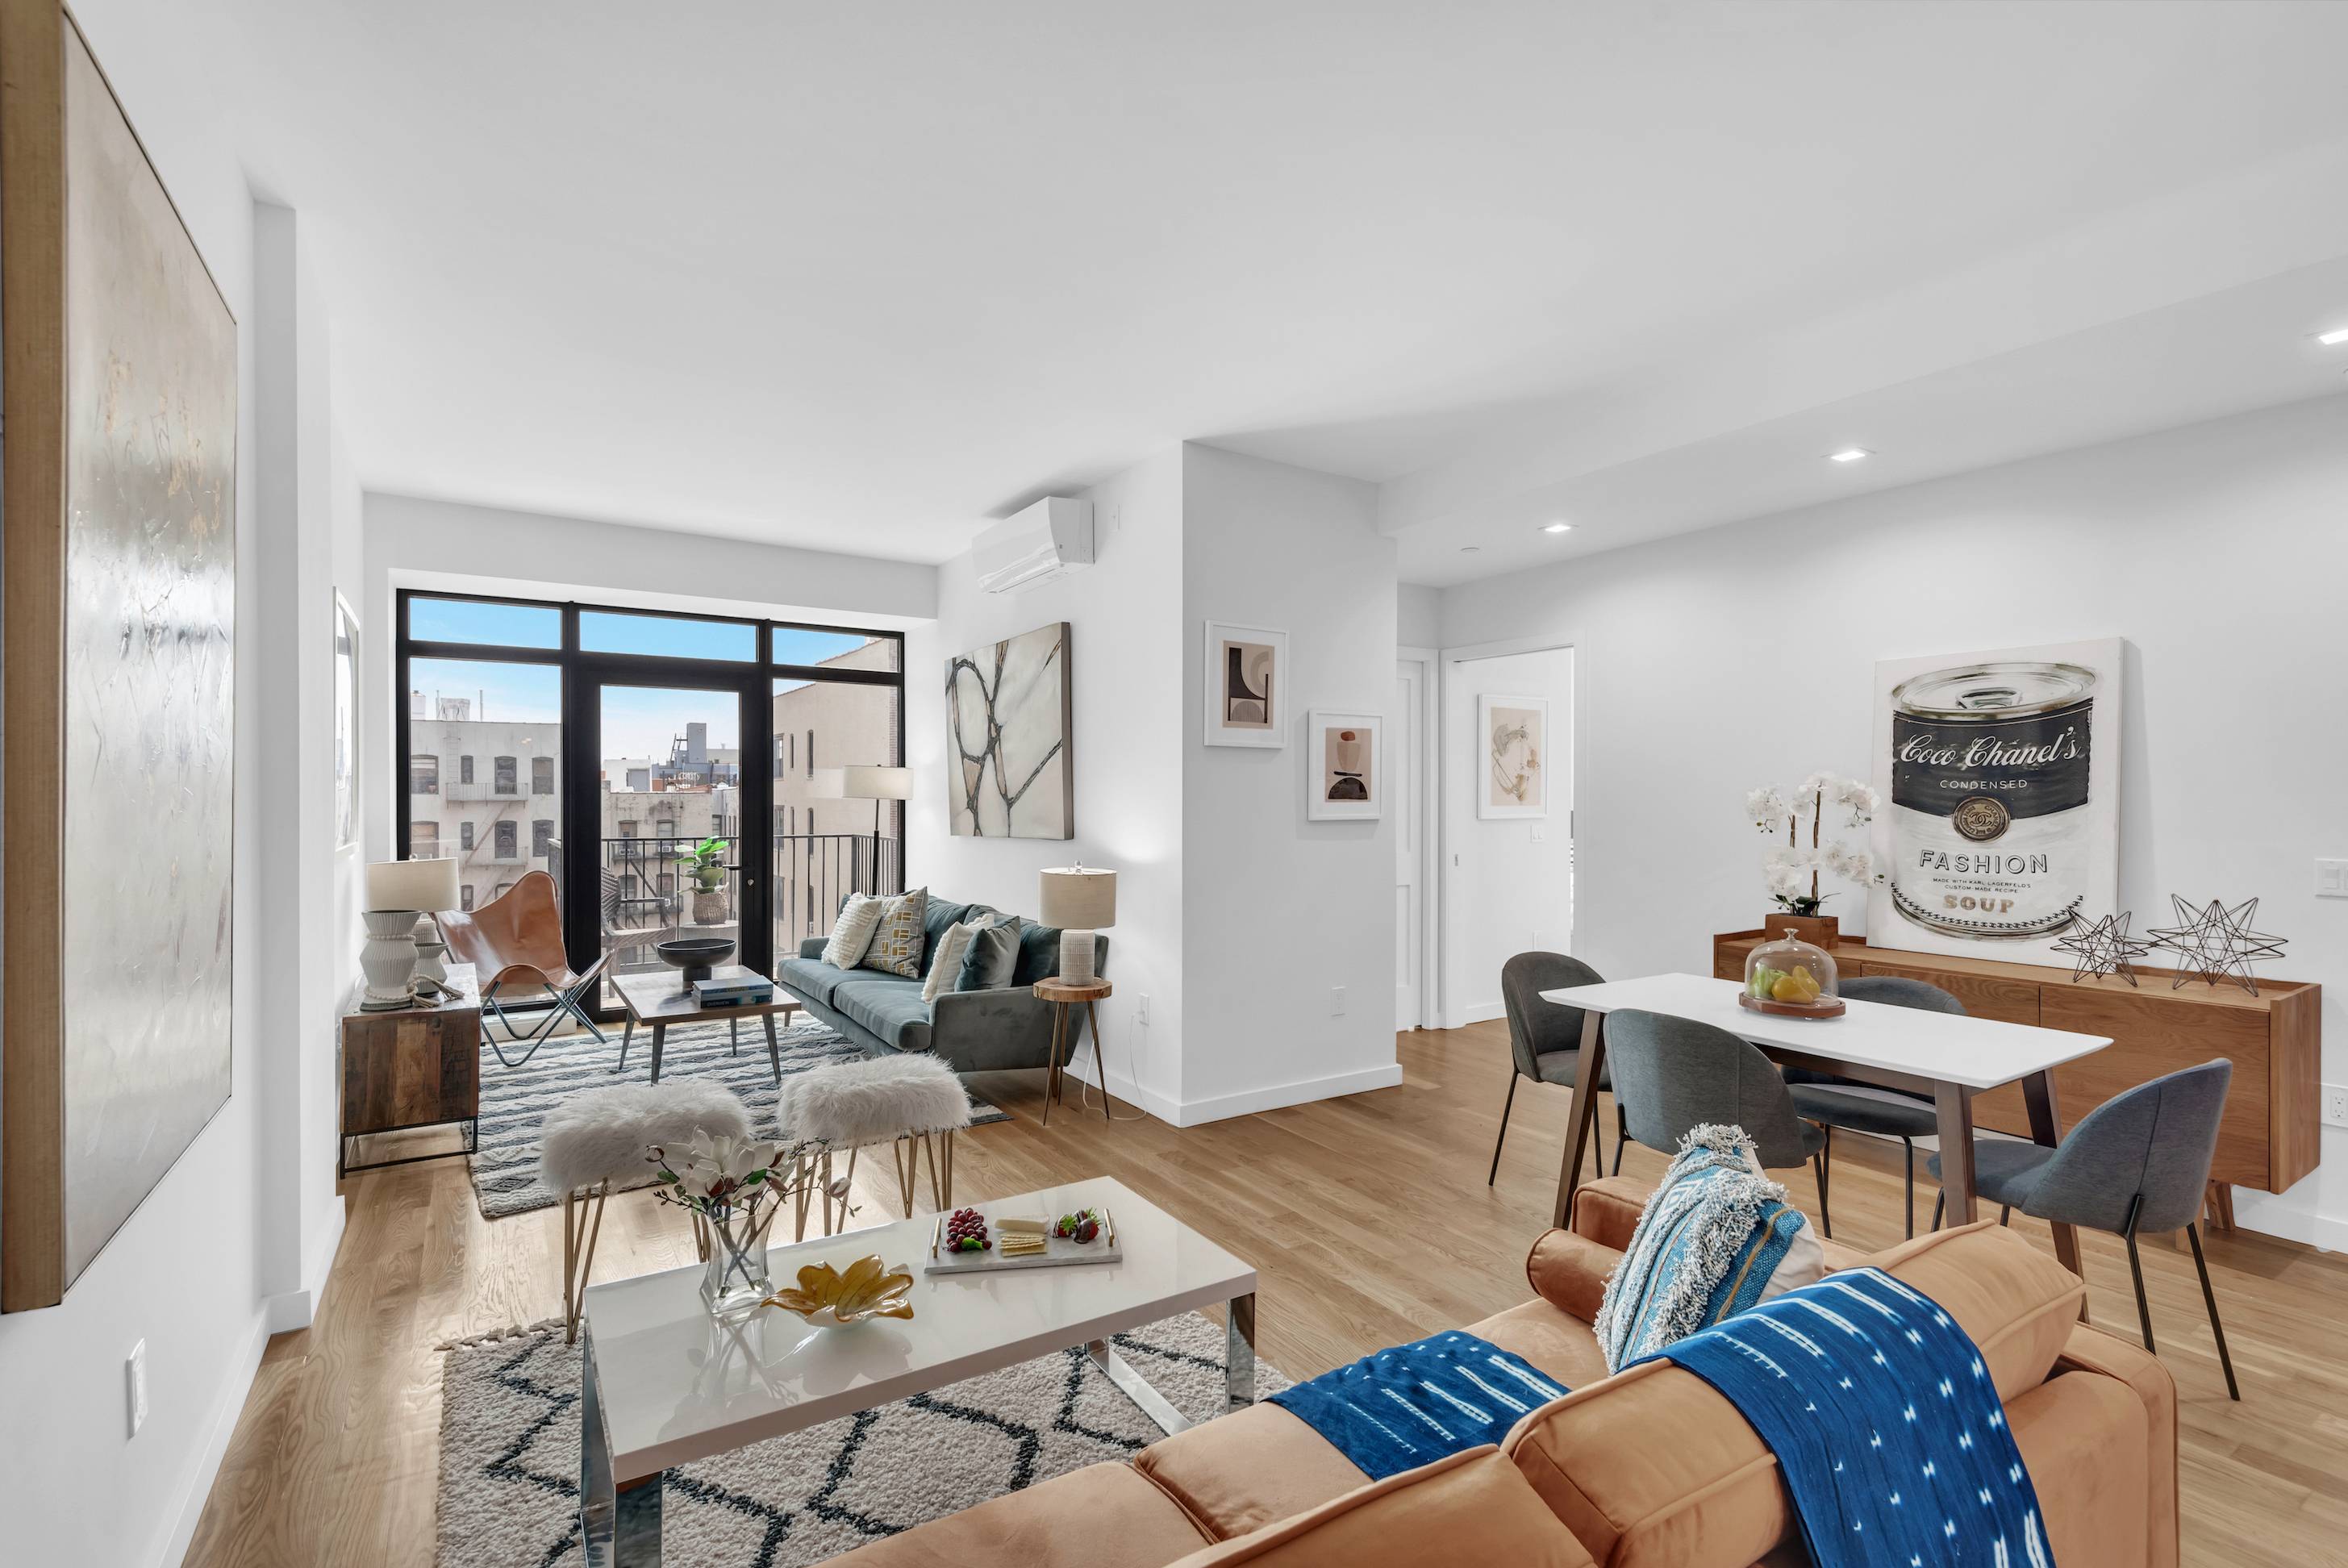 EXPANSIVE 2BED/2BATH WITH 2 BALCONIES IN ASTORIA